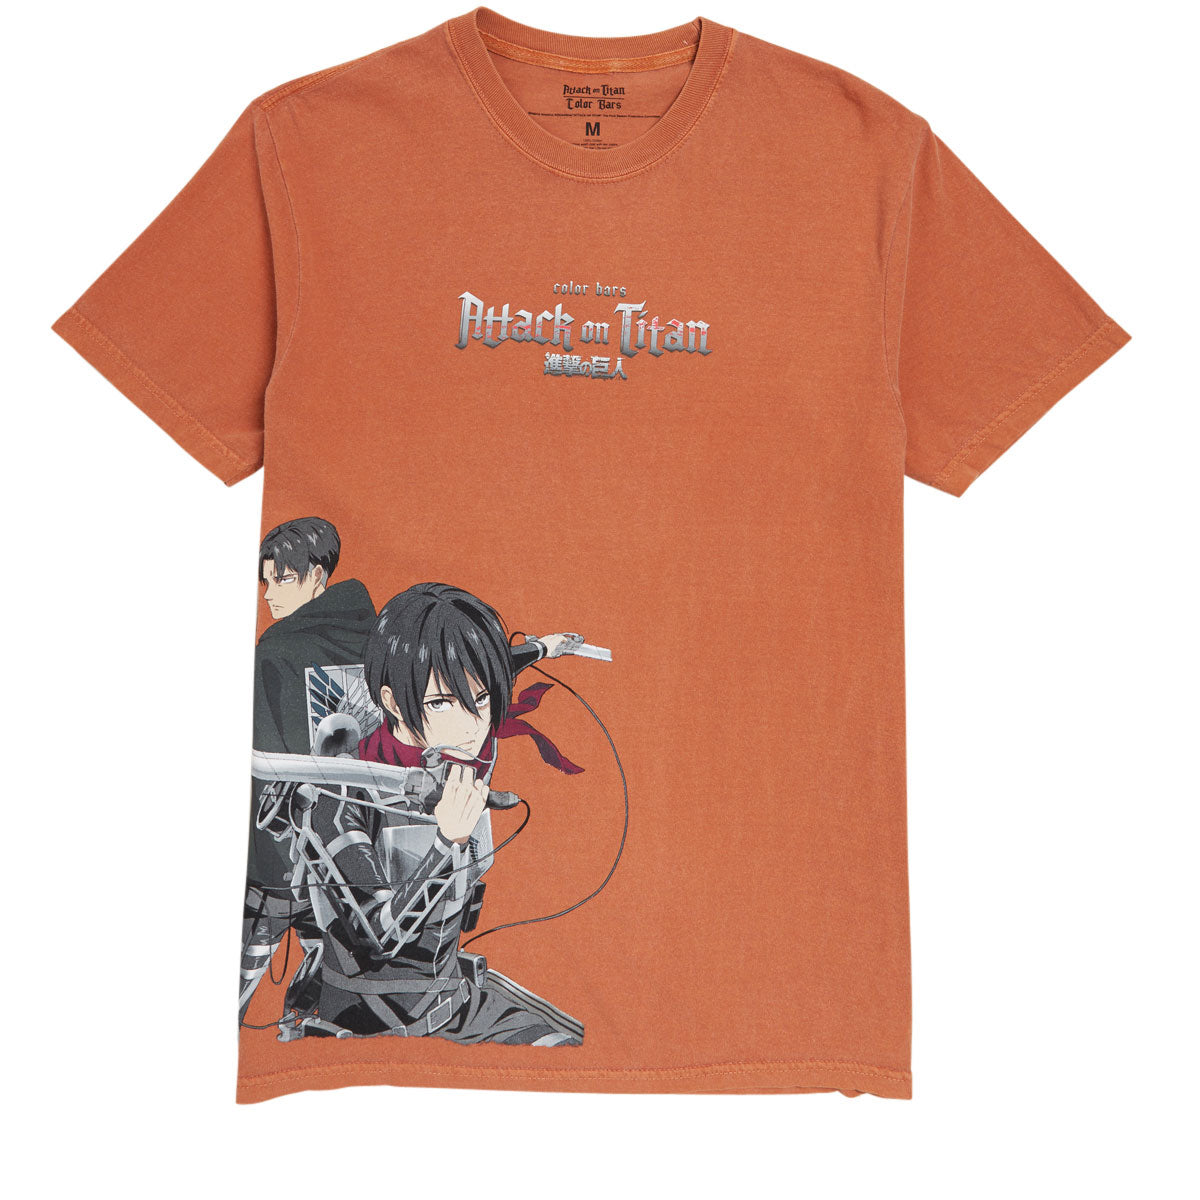 Color Bars x Attack on Titan Back to Back T-Shirt - Yam image 1